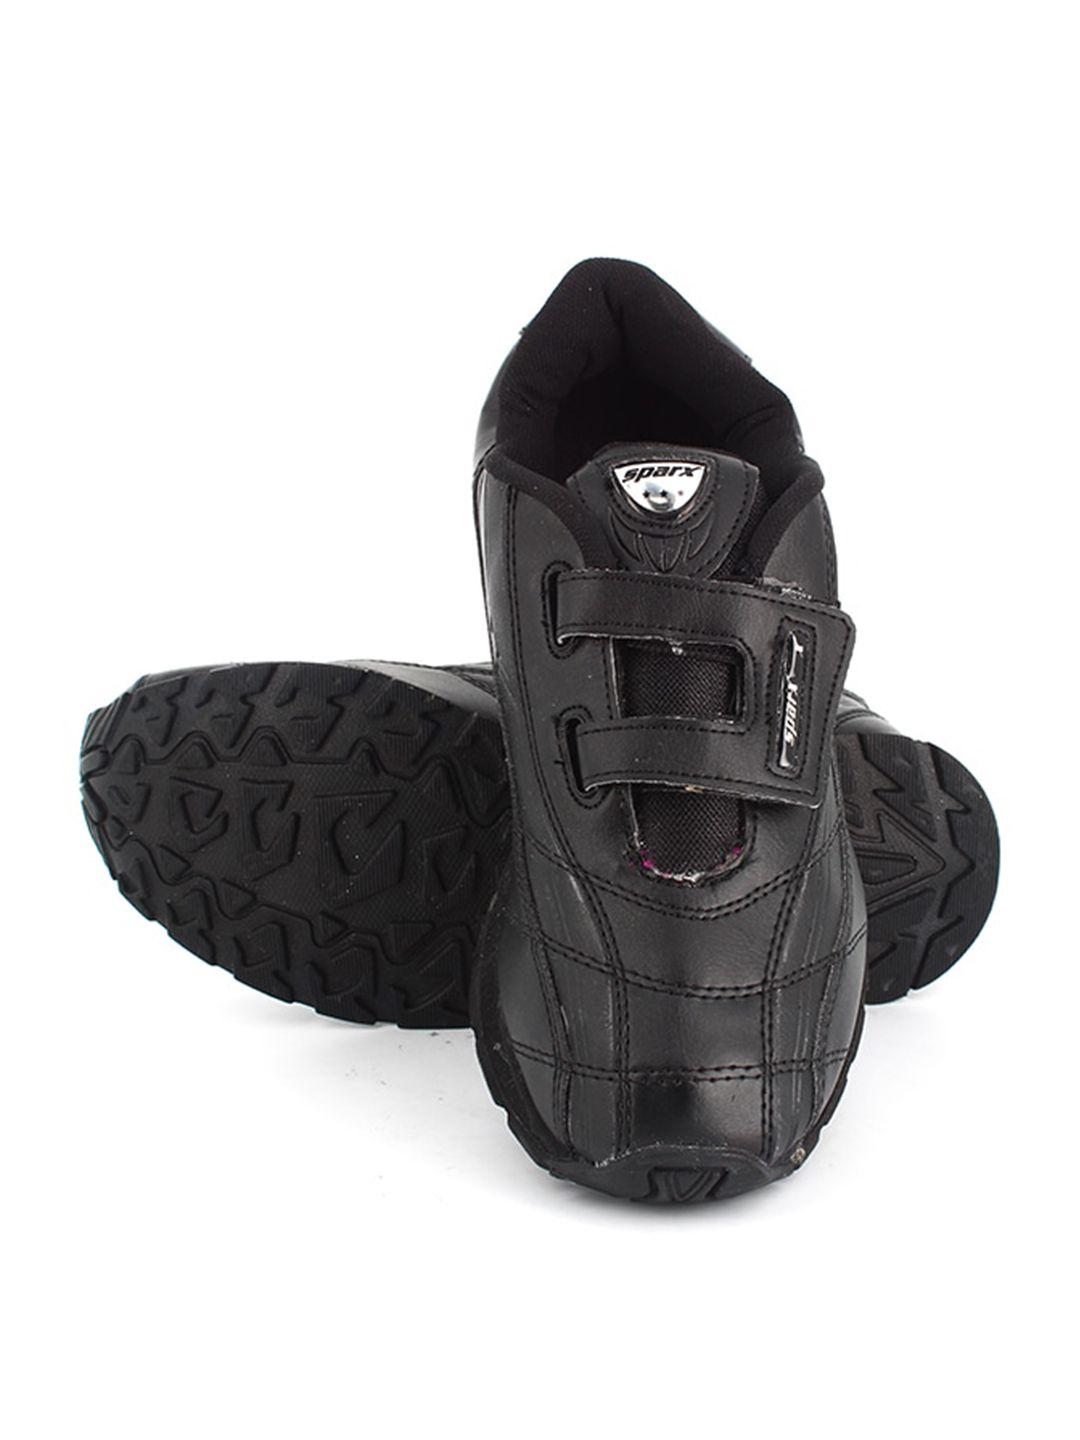 sparx boys textile running non-marking shoes